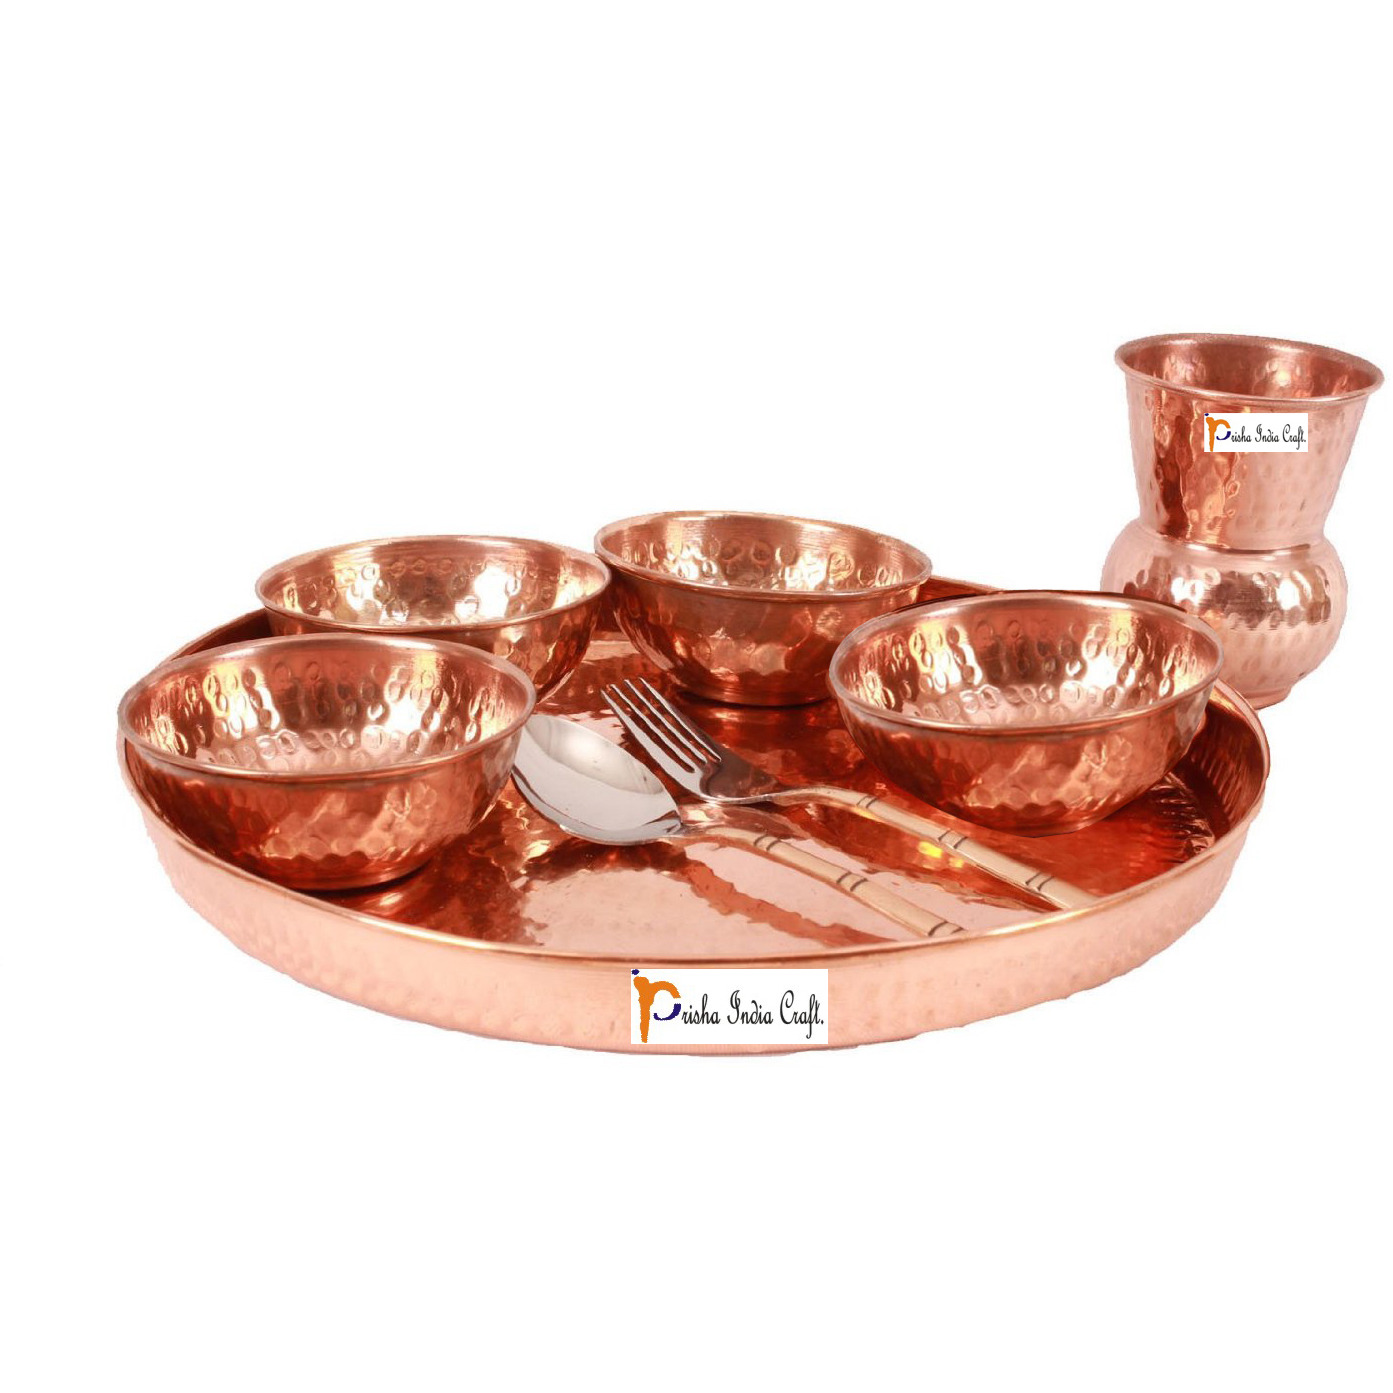 Prisha India Craft B. Set of 5 Dinnerware Traditional 100% Pure Copper Dinner Set of Thali Plate, Bowls, Glass and Spoon, Dia 12  With 1 Luxury Style Pure Copper Pitcher Jug - Christmas Gift